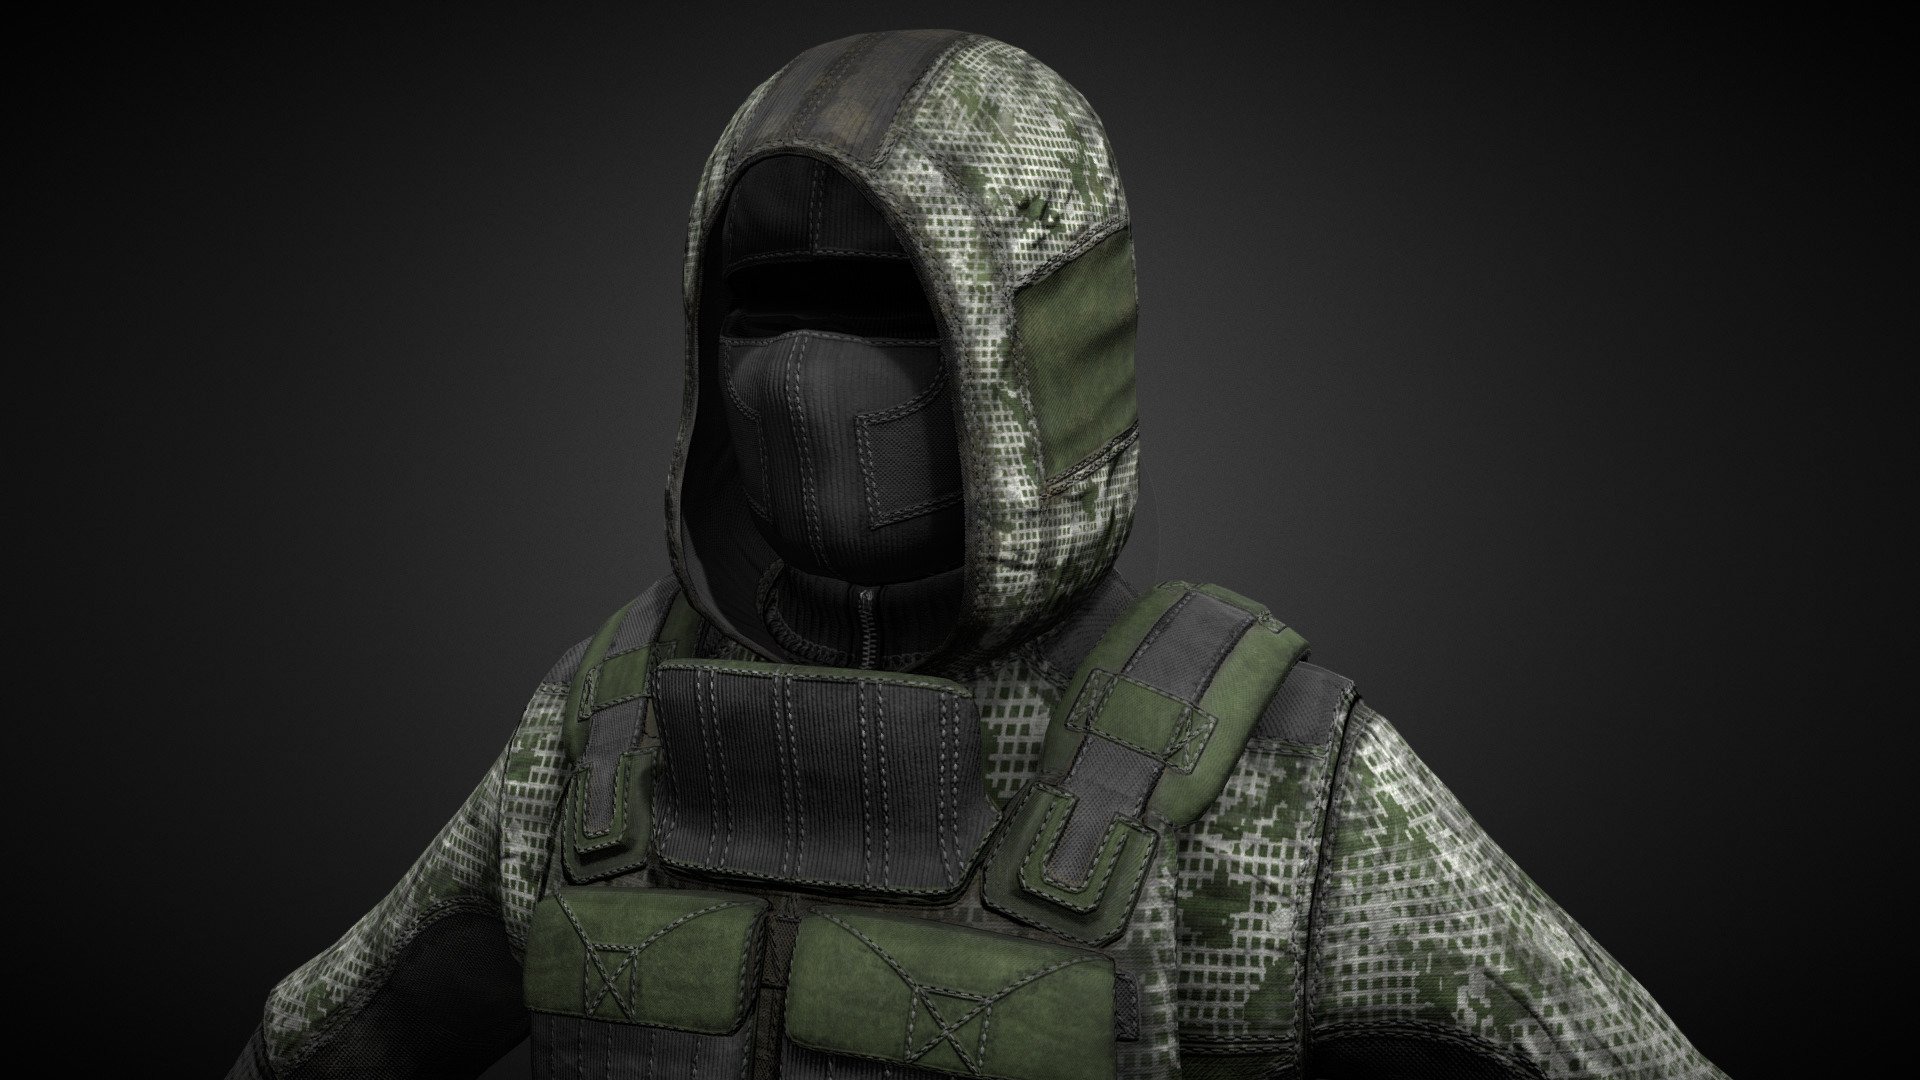 You can download the texture pack for DayZ from the link: https://drive.google.com/drive/folders/1BqCMjWshfP3ZMNEap3nMxF4Dfs75WKjm?usp=sharing - Clothing set with body armor - Download Free 3D model by VALIDOL (@VALIDOLOVICH) 3d model